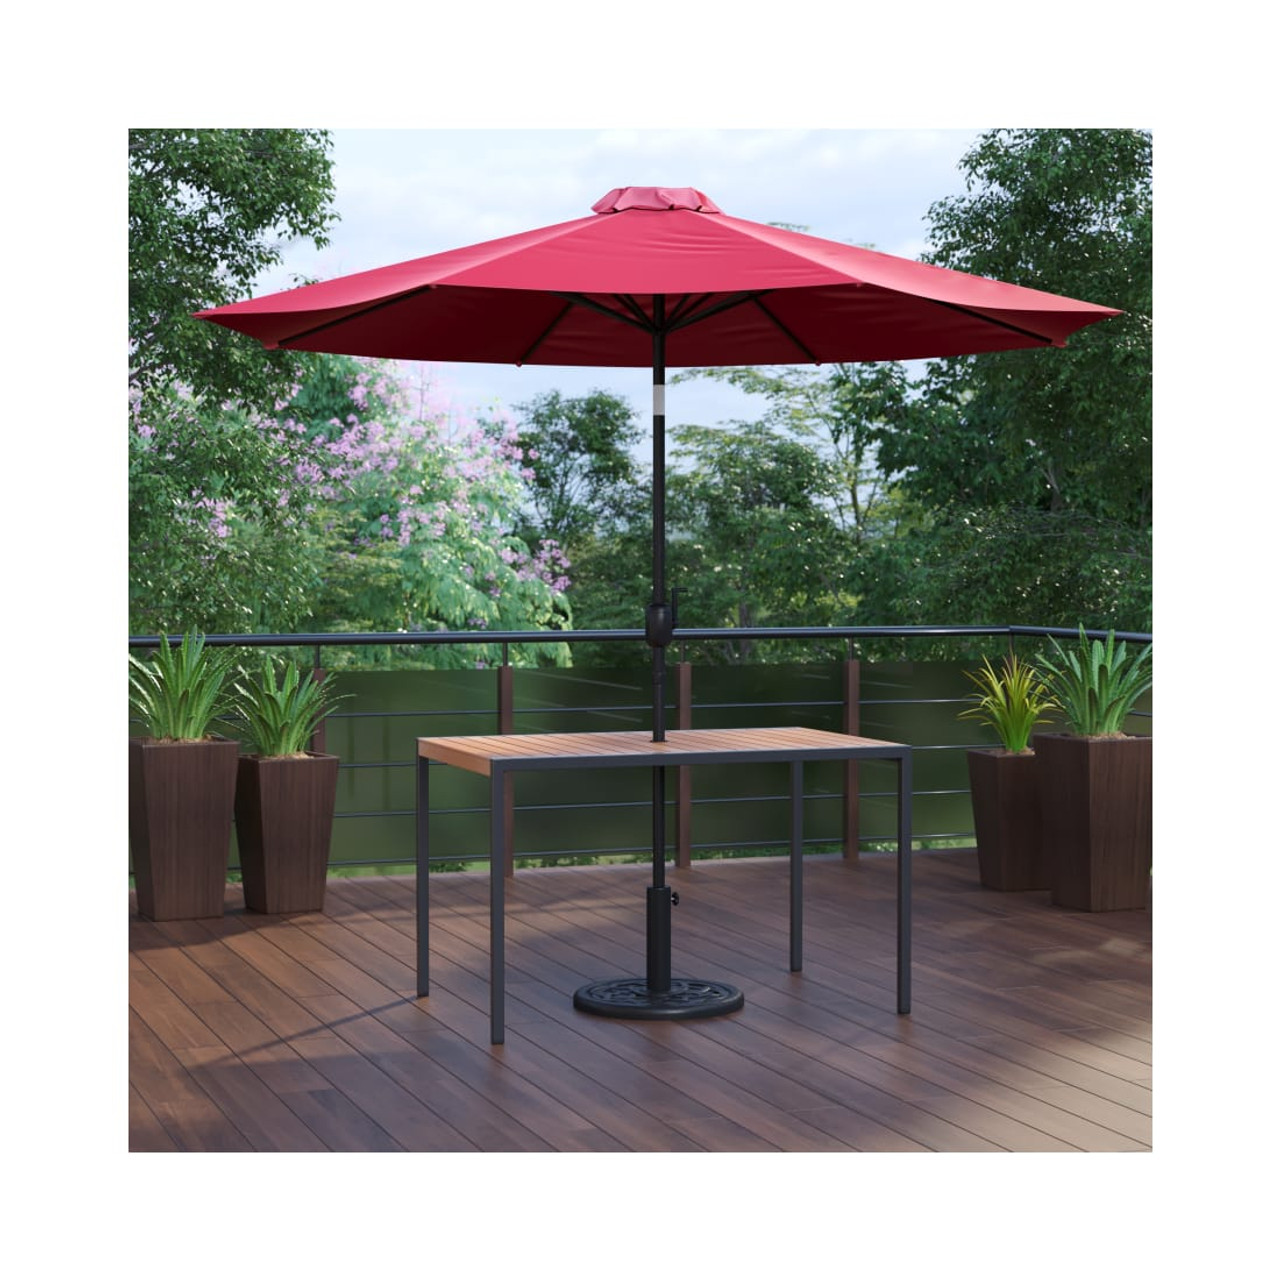 3 Piece Outdoor Patio Table Set 30" x 48" Synthetic Teak Patio Table with Red Umbrella and Base